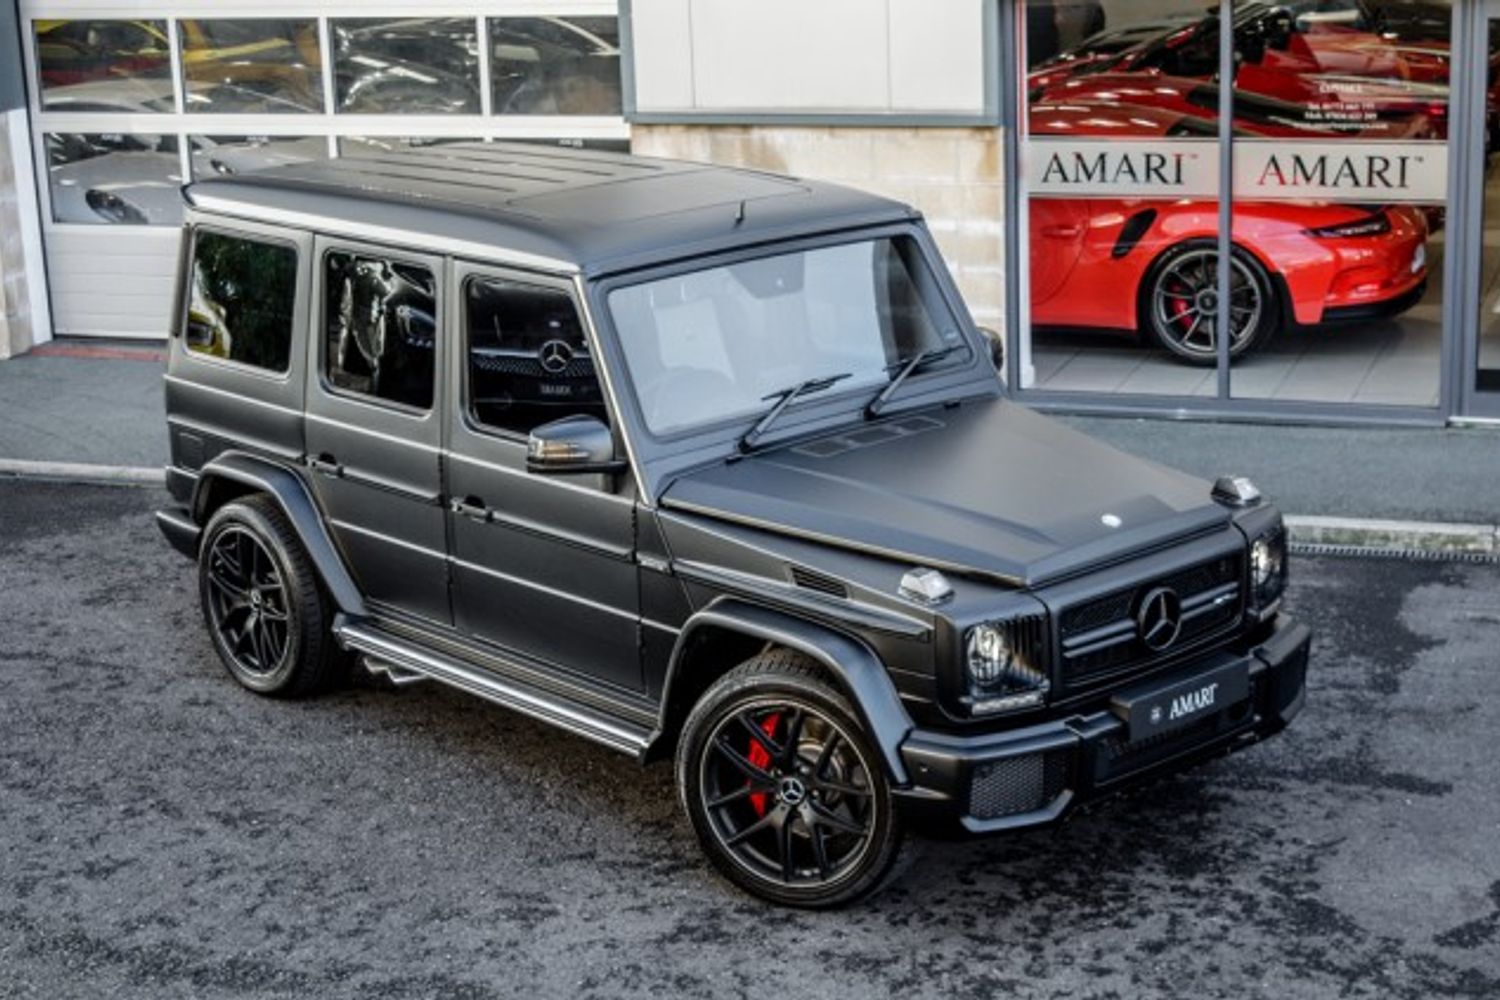 MERCEDES-BENZ G-CLASS ESTATE 5.5 AMG G 63 4MATIC EDITION 463 5DR AUTOMATIC